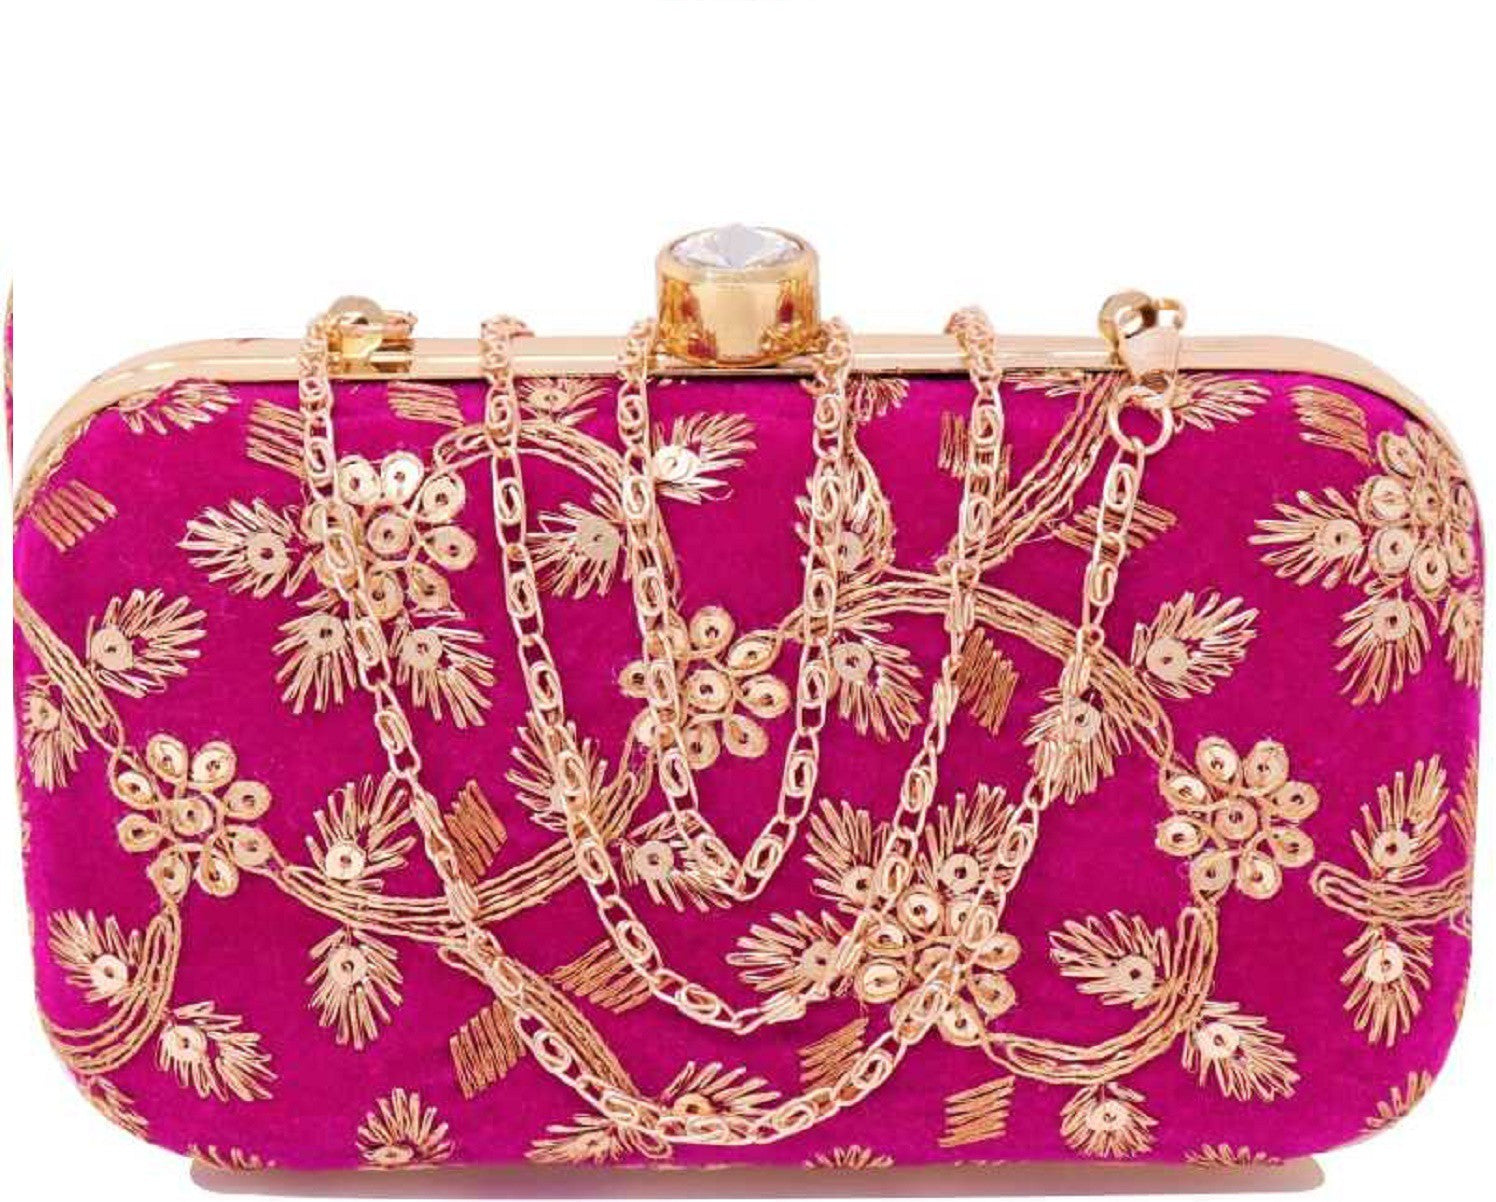 Women's Combo Of Clutch And Potli For Wedding - Ritzie